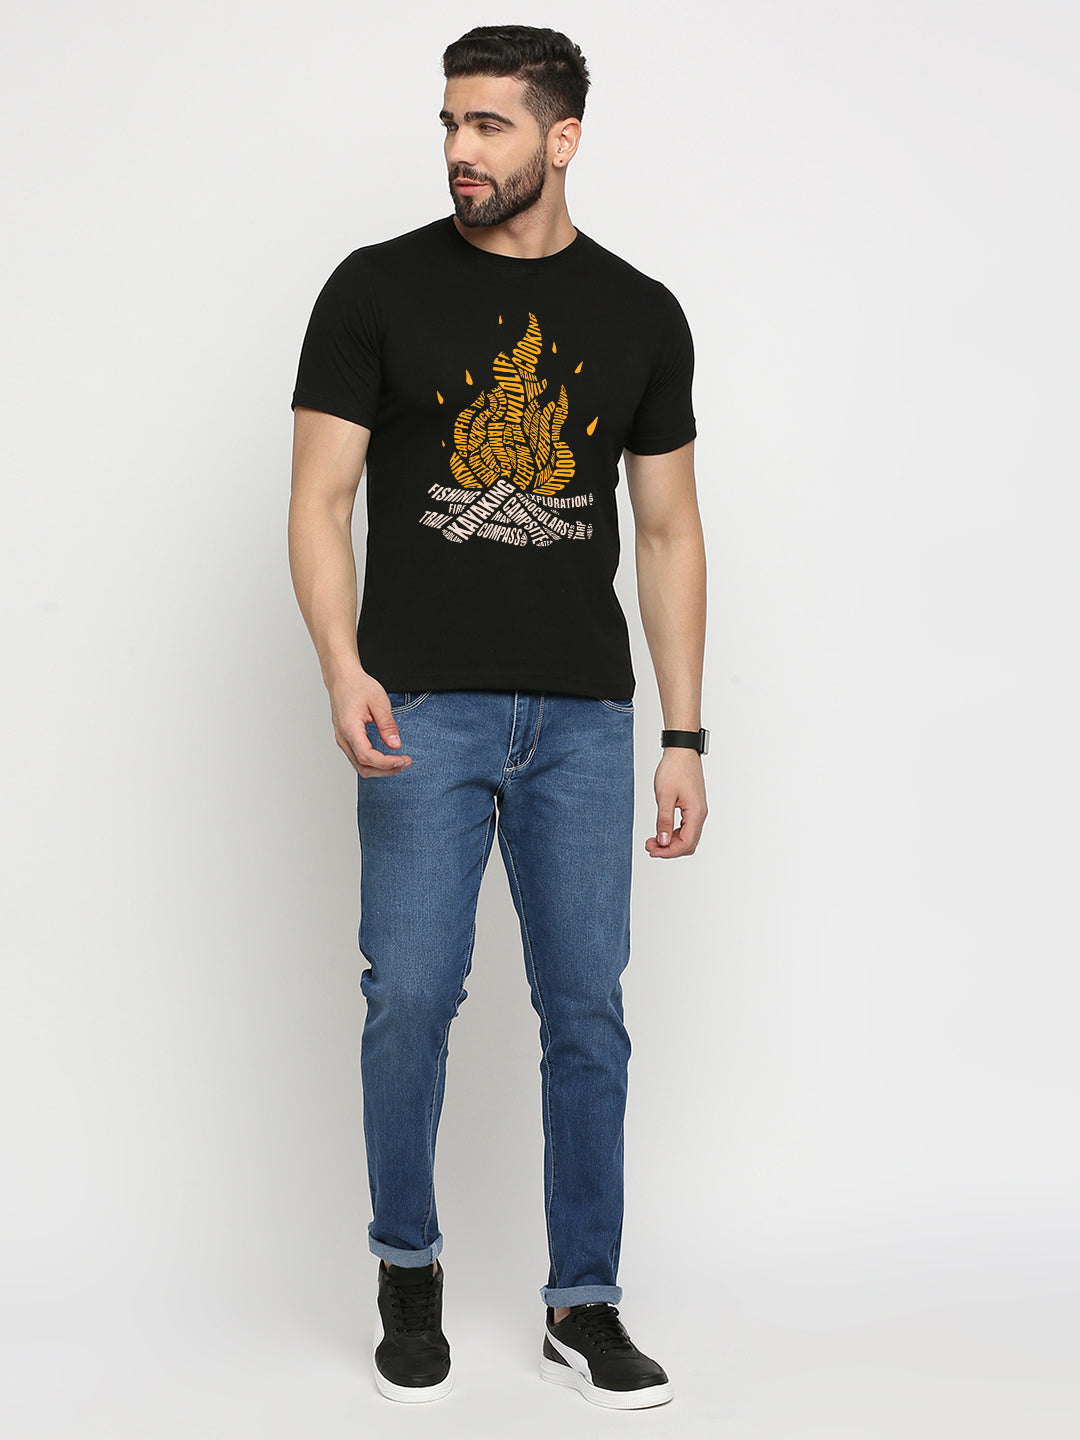 Campfire Typography T-Shirt